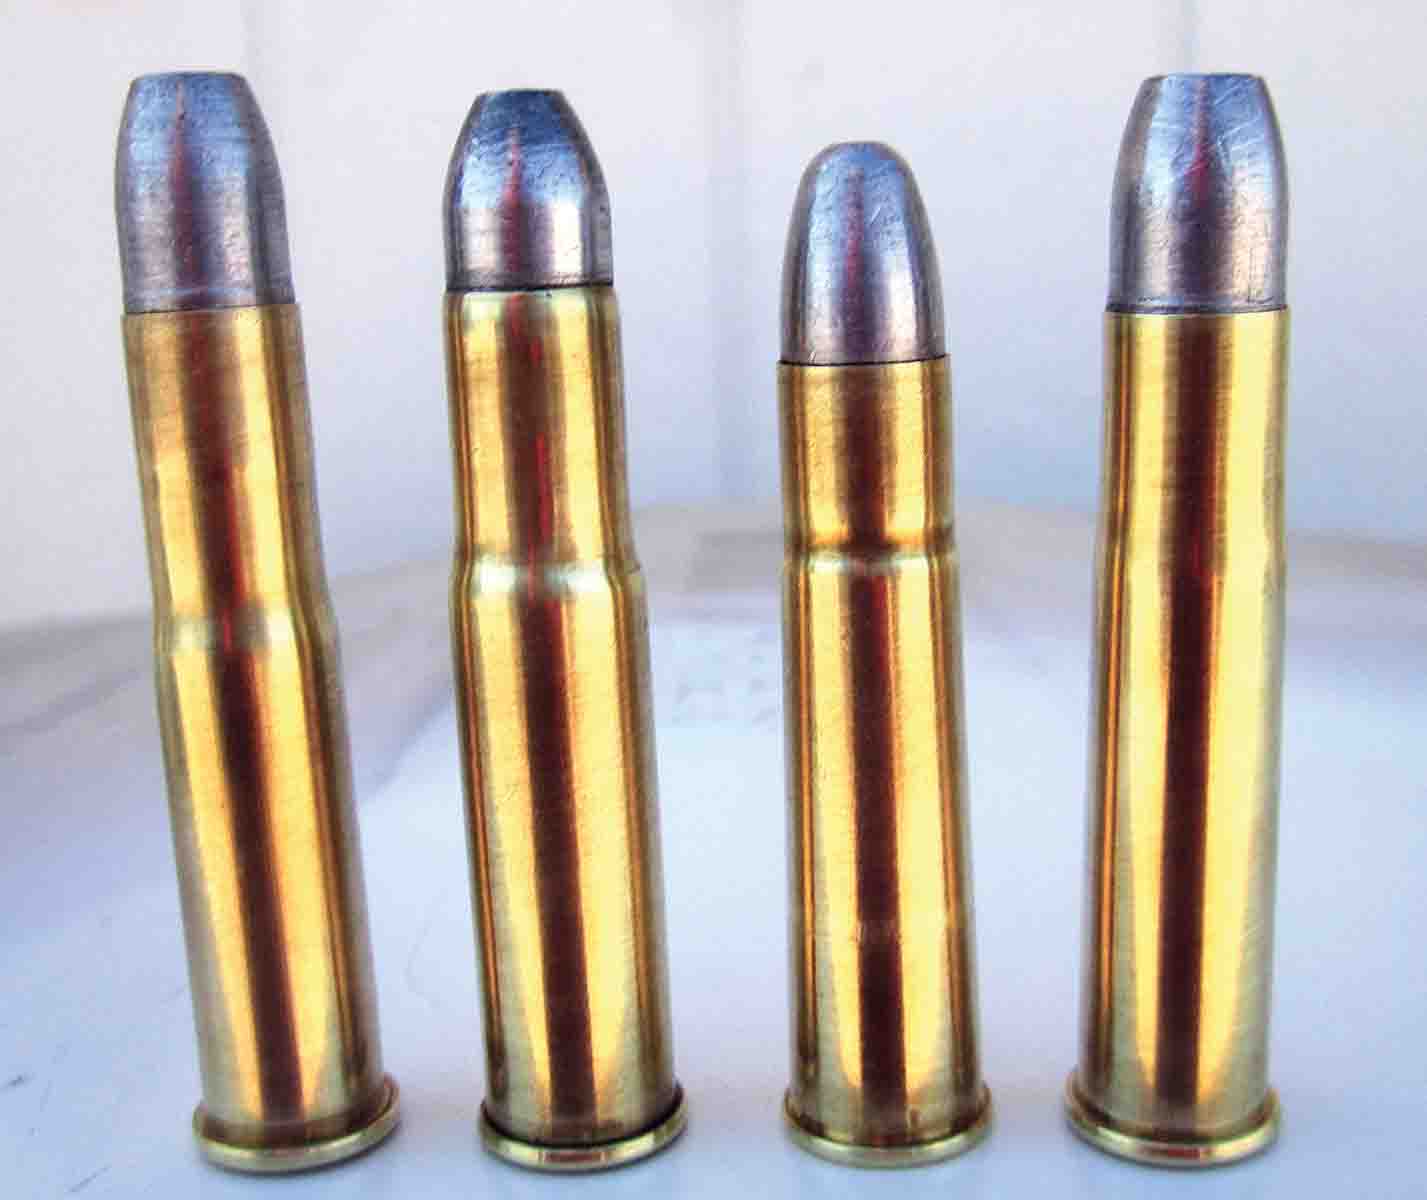 From left: the 11mm Reformado, the .43 Spanish, the 11mm Gras and the .43 Mauser.